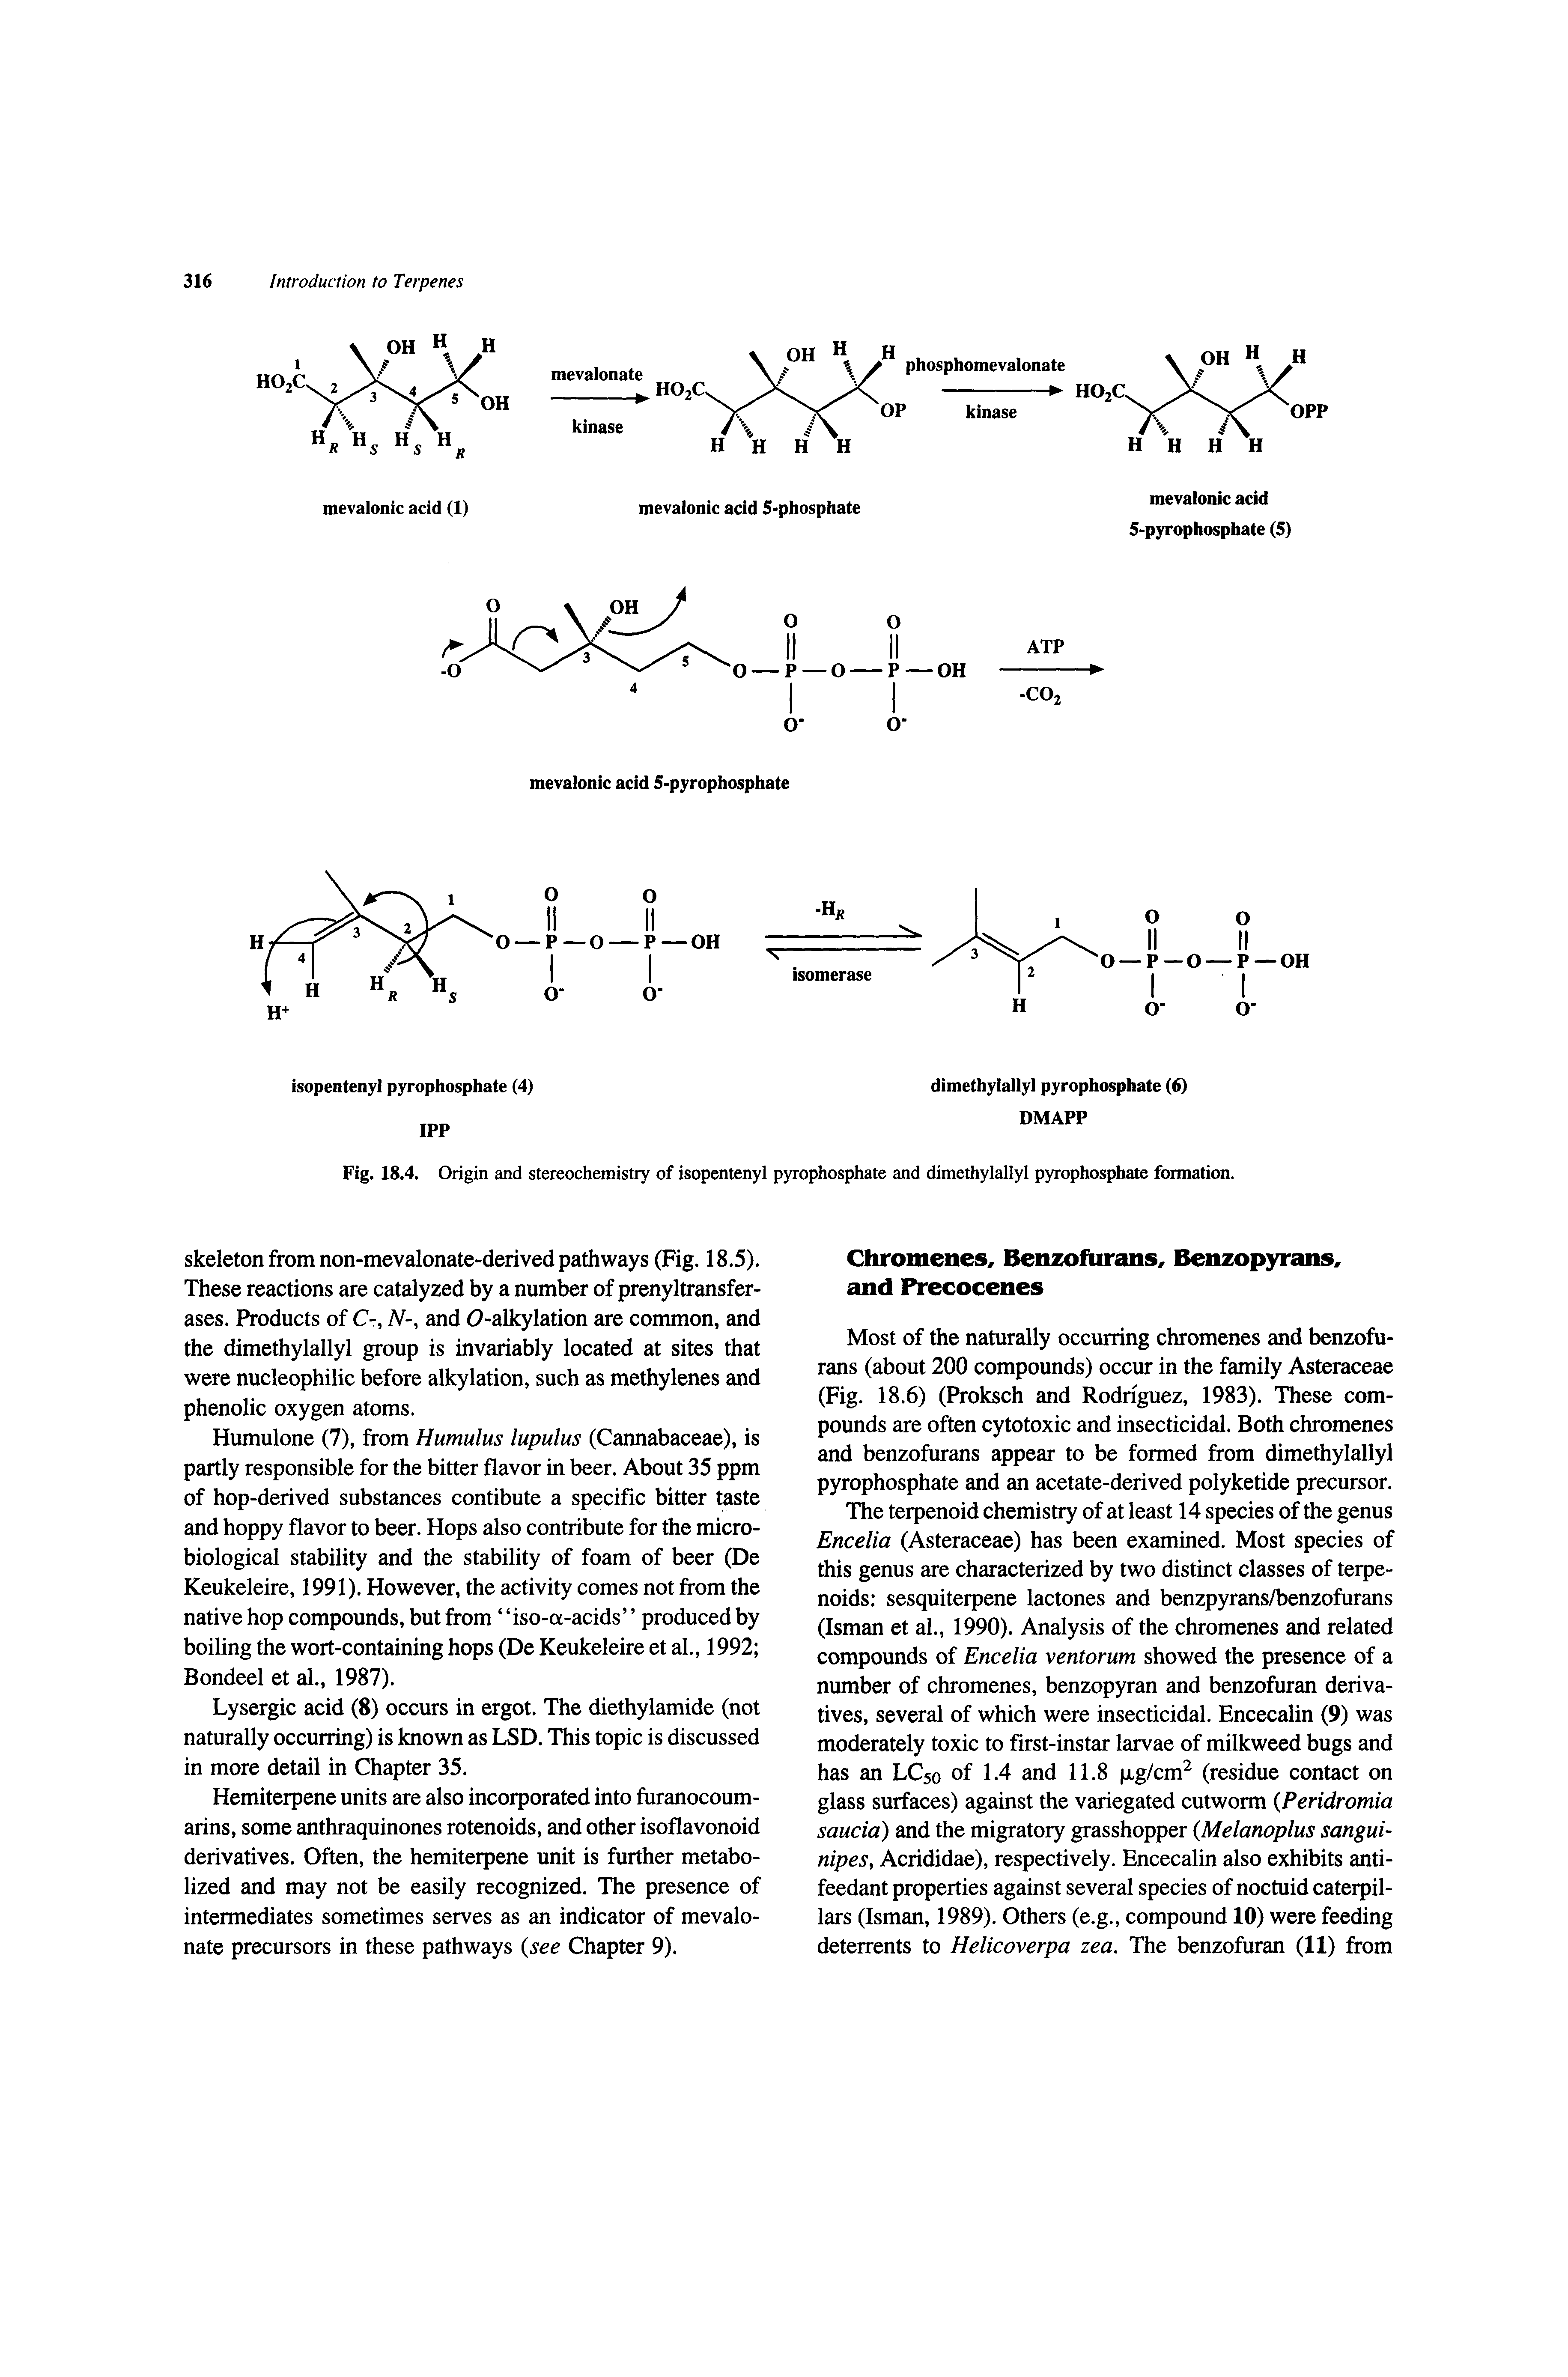 Fig. 18.4. Origin and stereochemistry of isopentenyl pyrophosphate and dimethylallyl pyrophosphate formation.